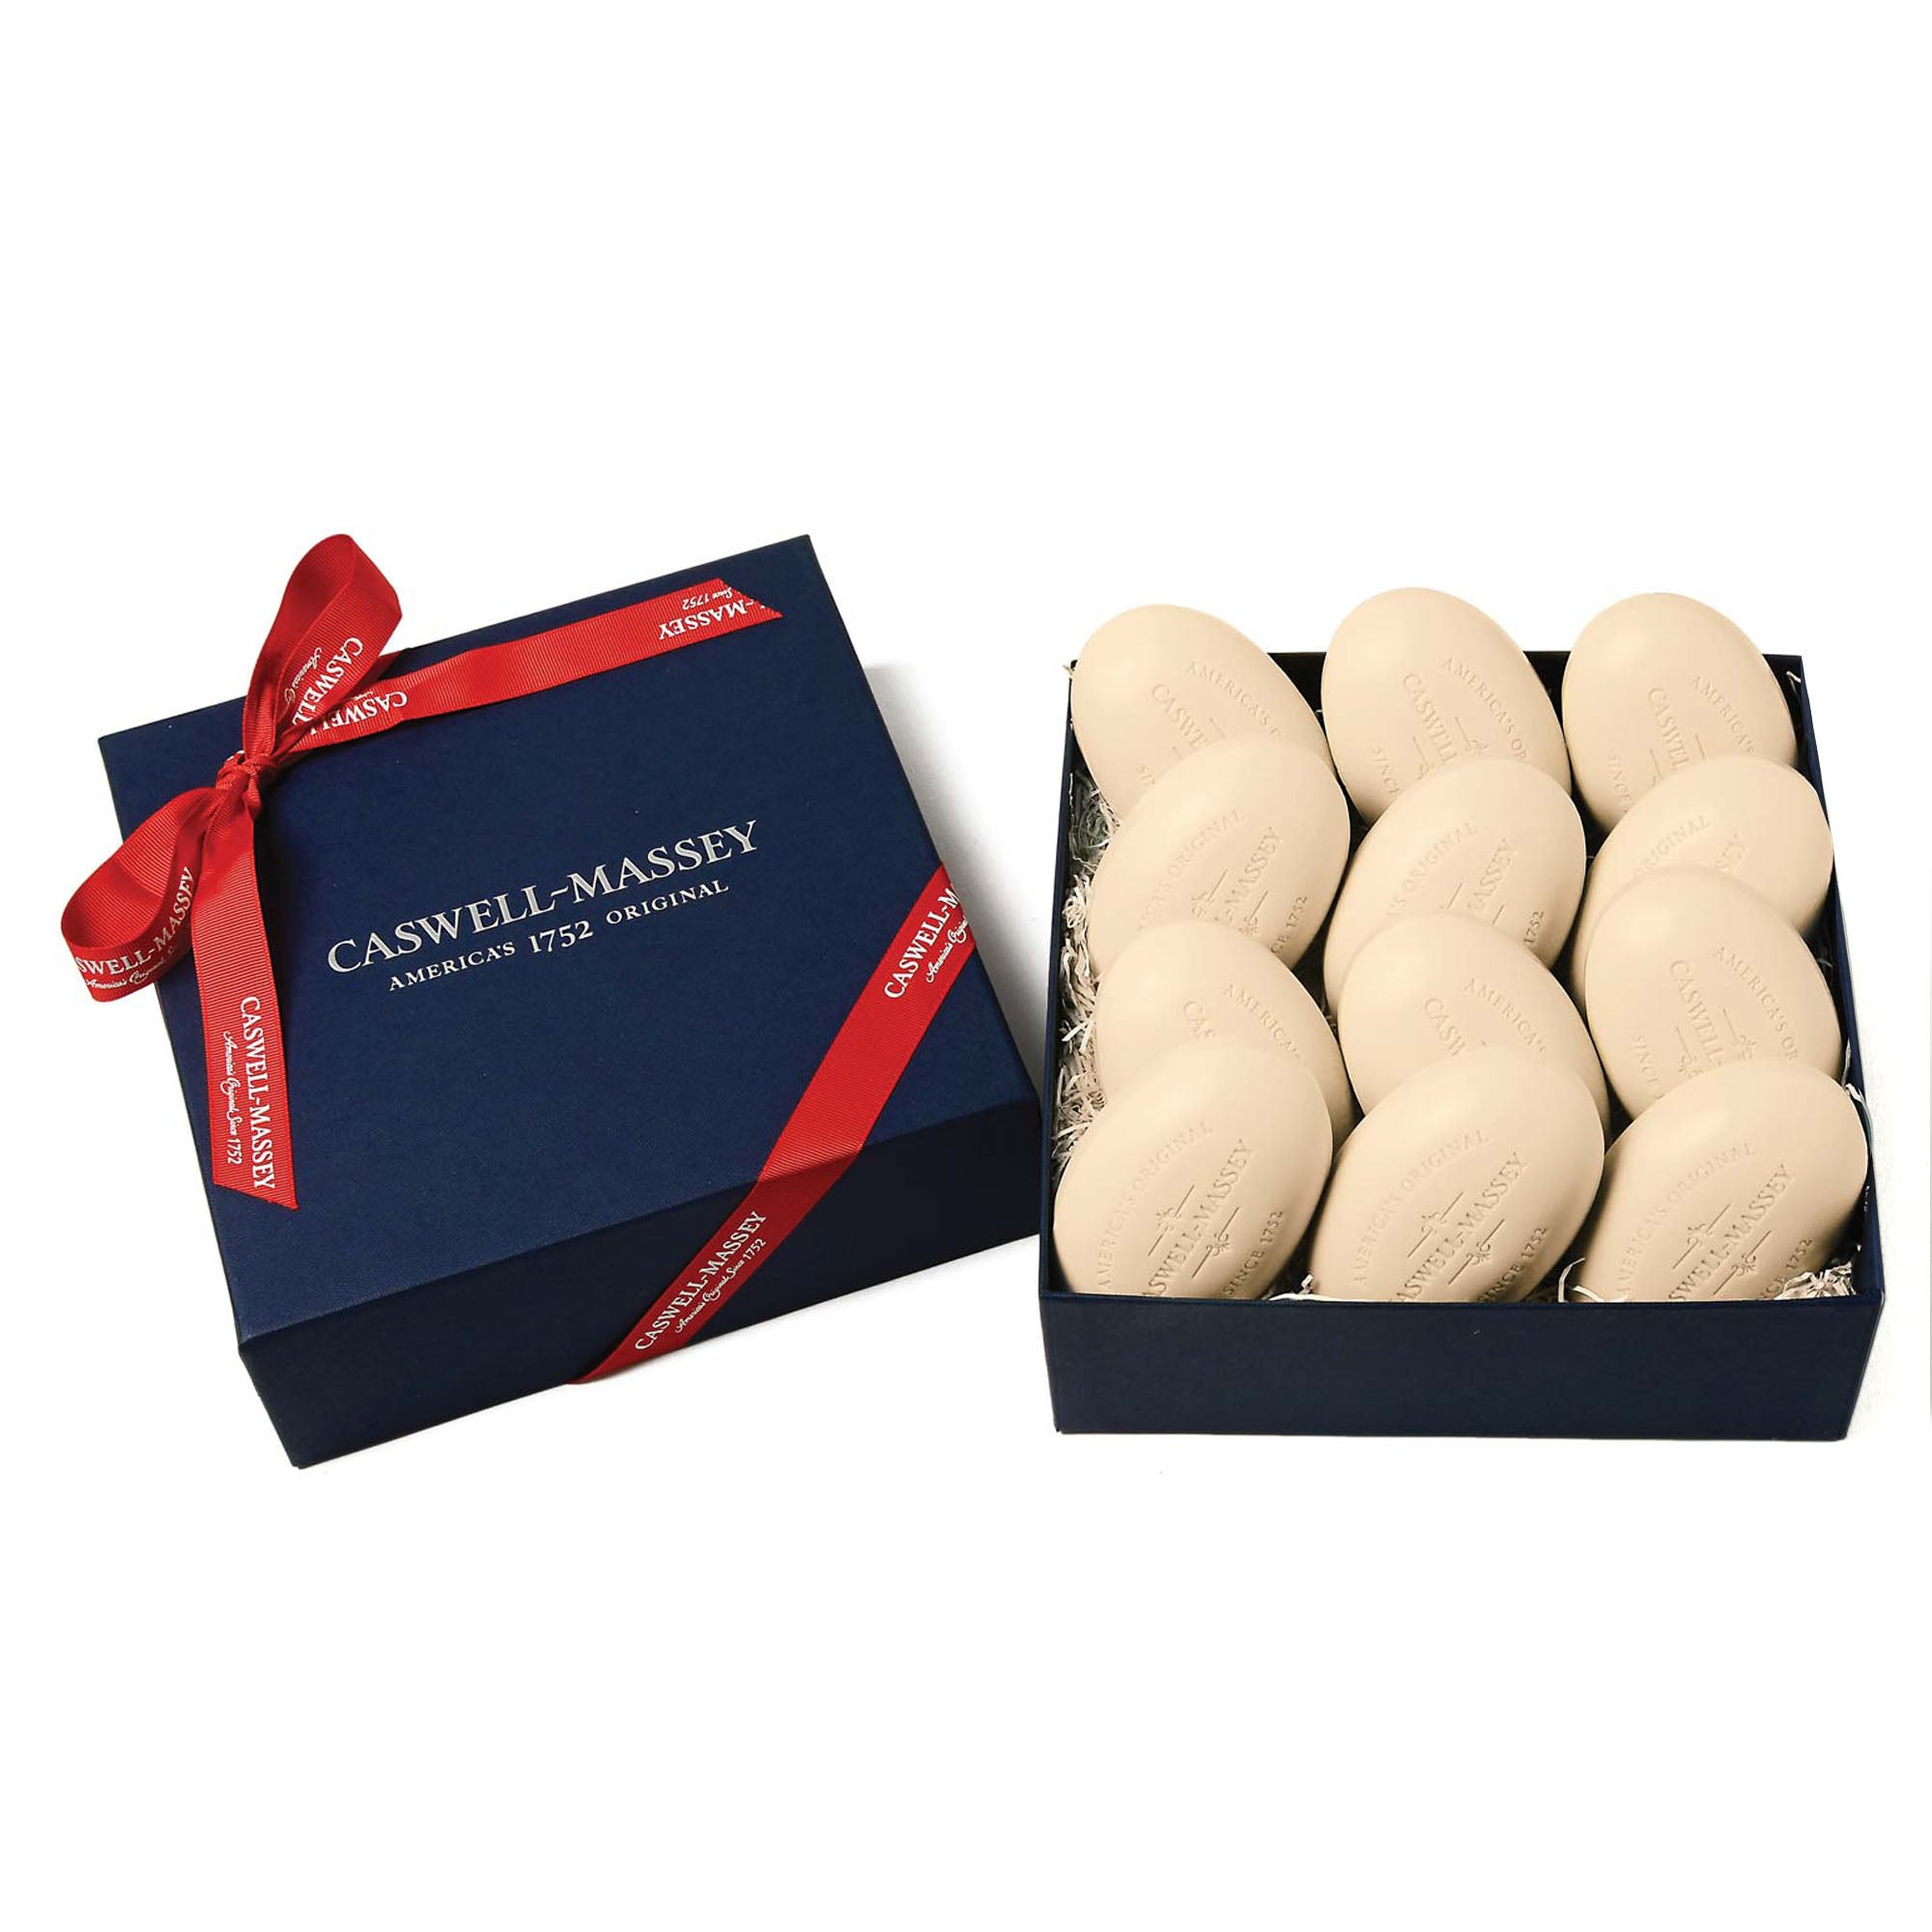 Caswell-Massey® Heritage Number Six Year of Soap Gift Set: 12 bars of Number Six Soap presented in navy blue gift box with red ribbon